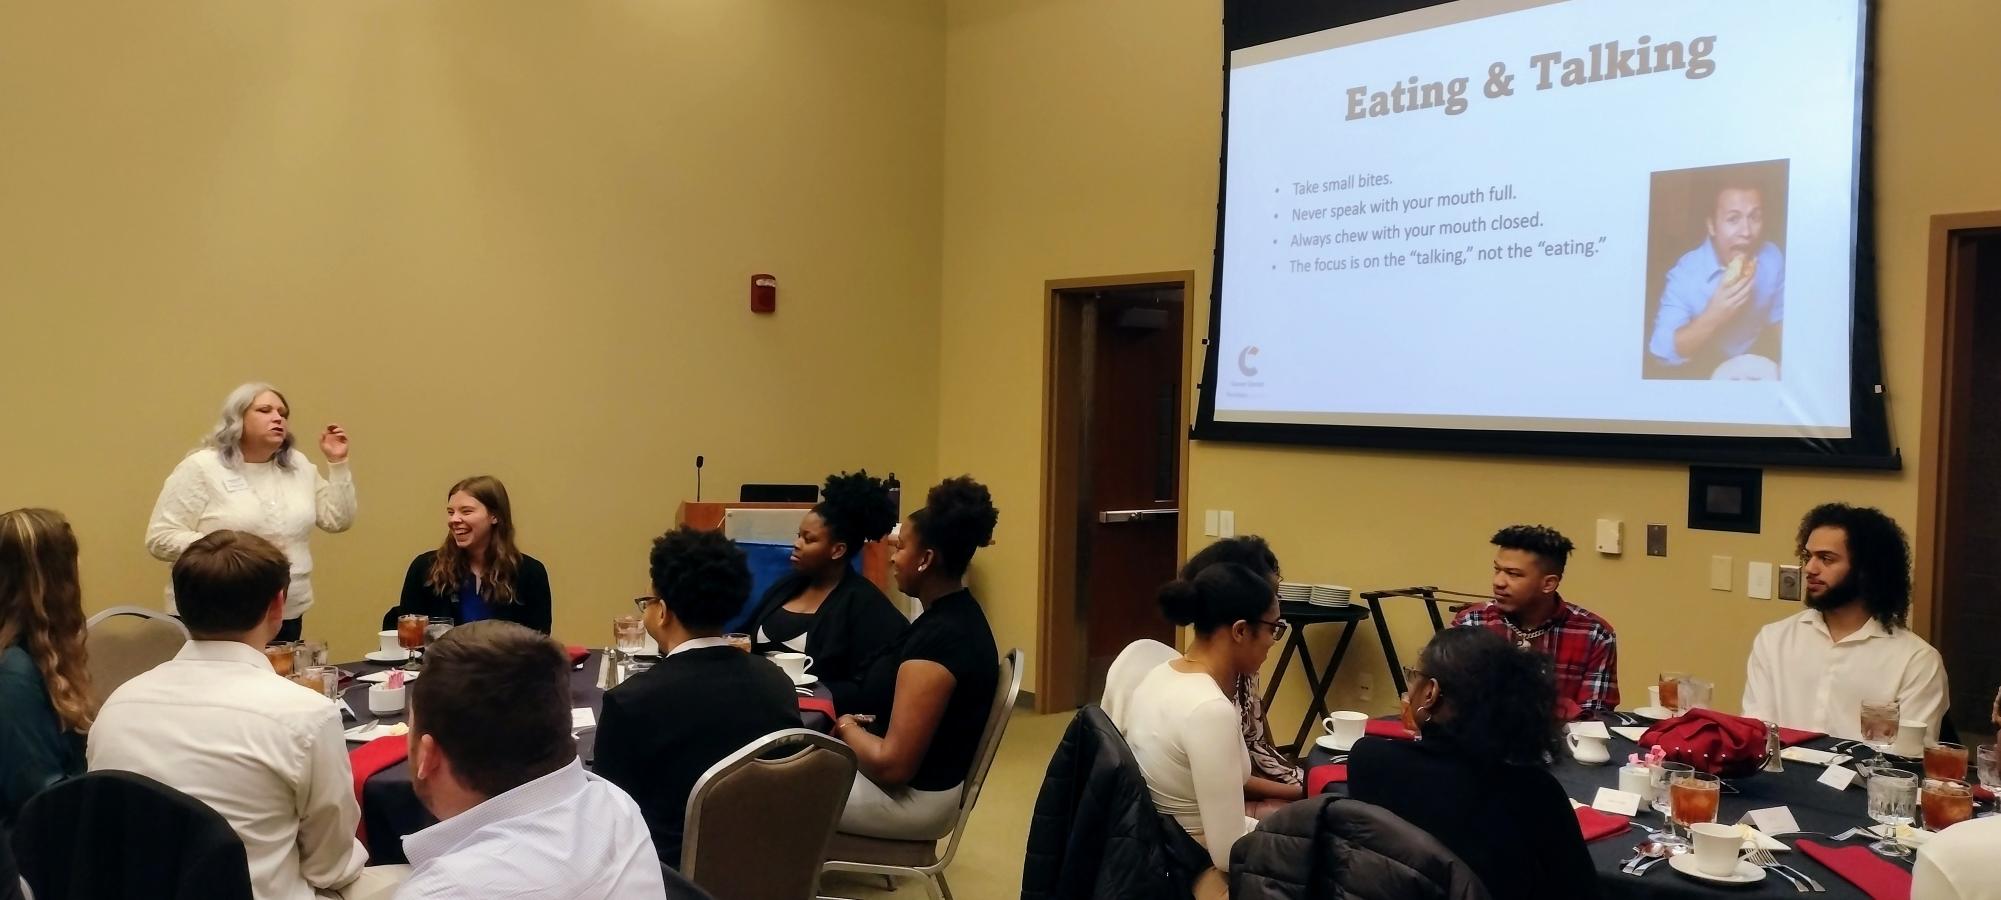 DECAs Etiquette Dinner Sponsored by Enterprise Mobility and the Career Center